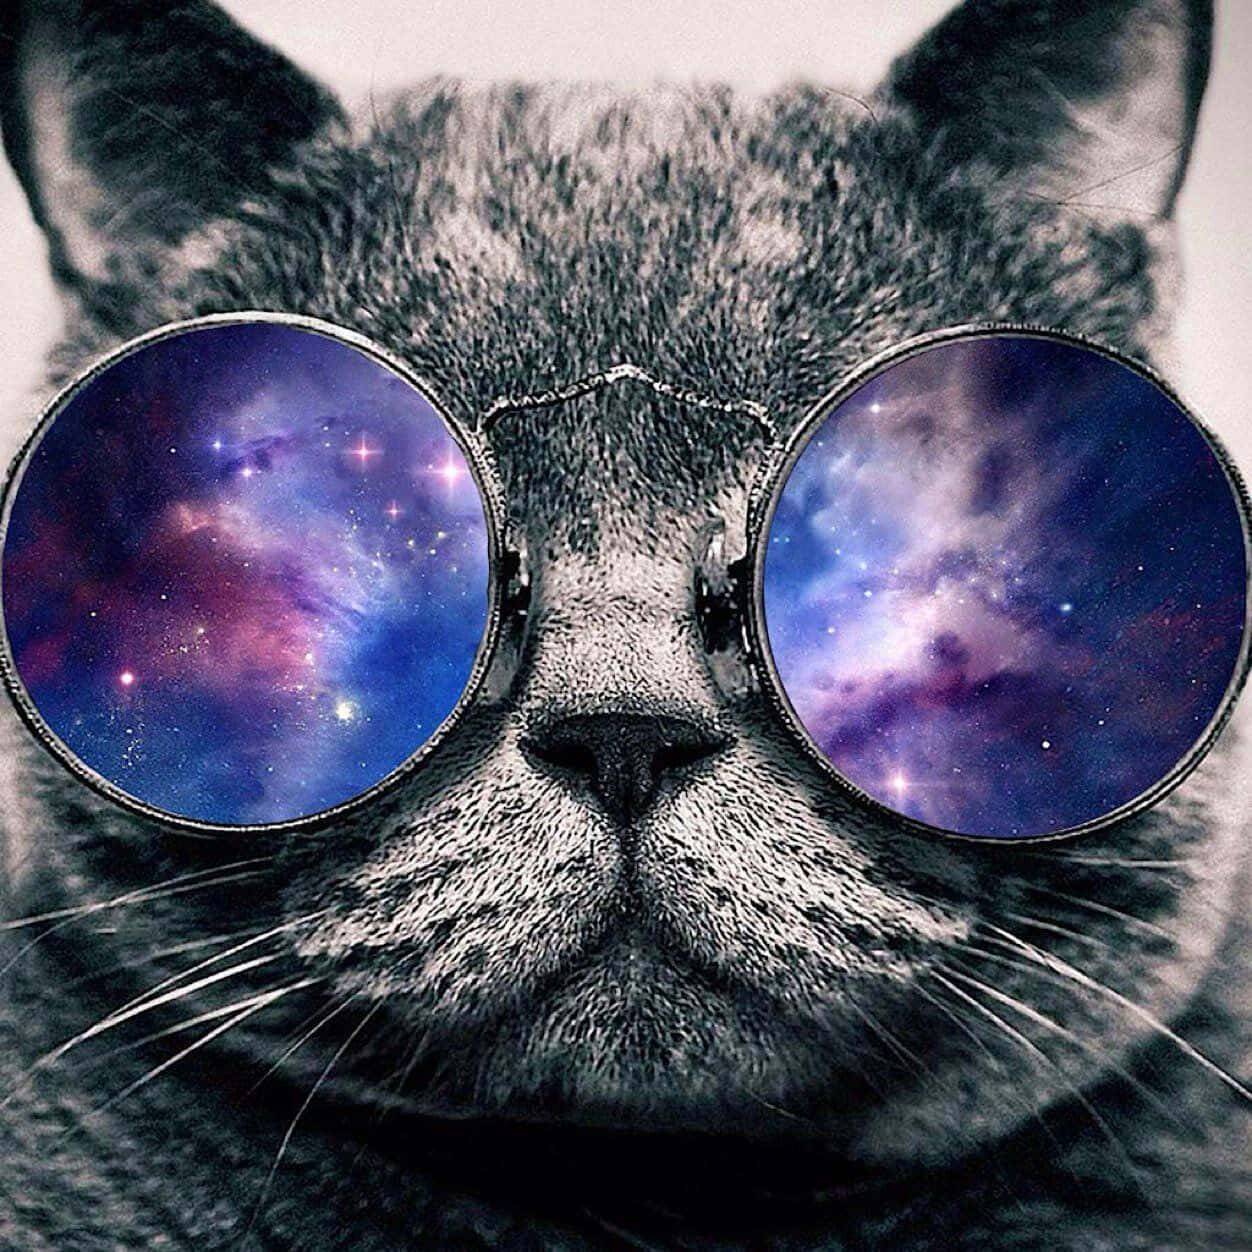 A dreamy, galactic cat looking off into the night Wallpaper